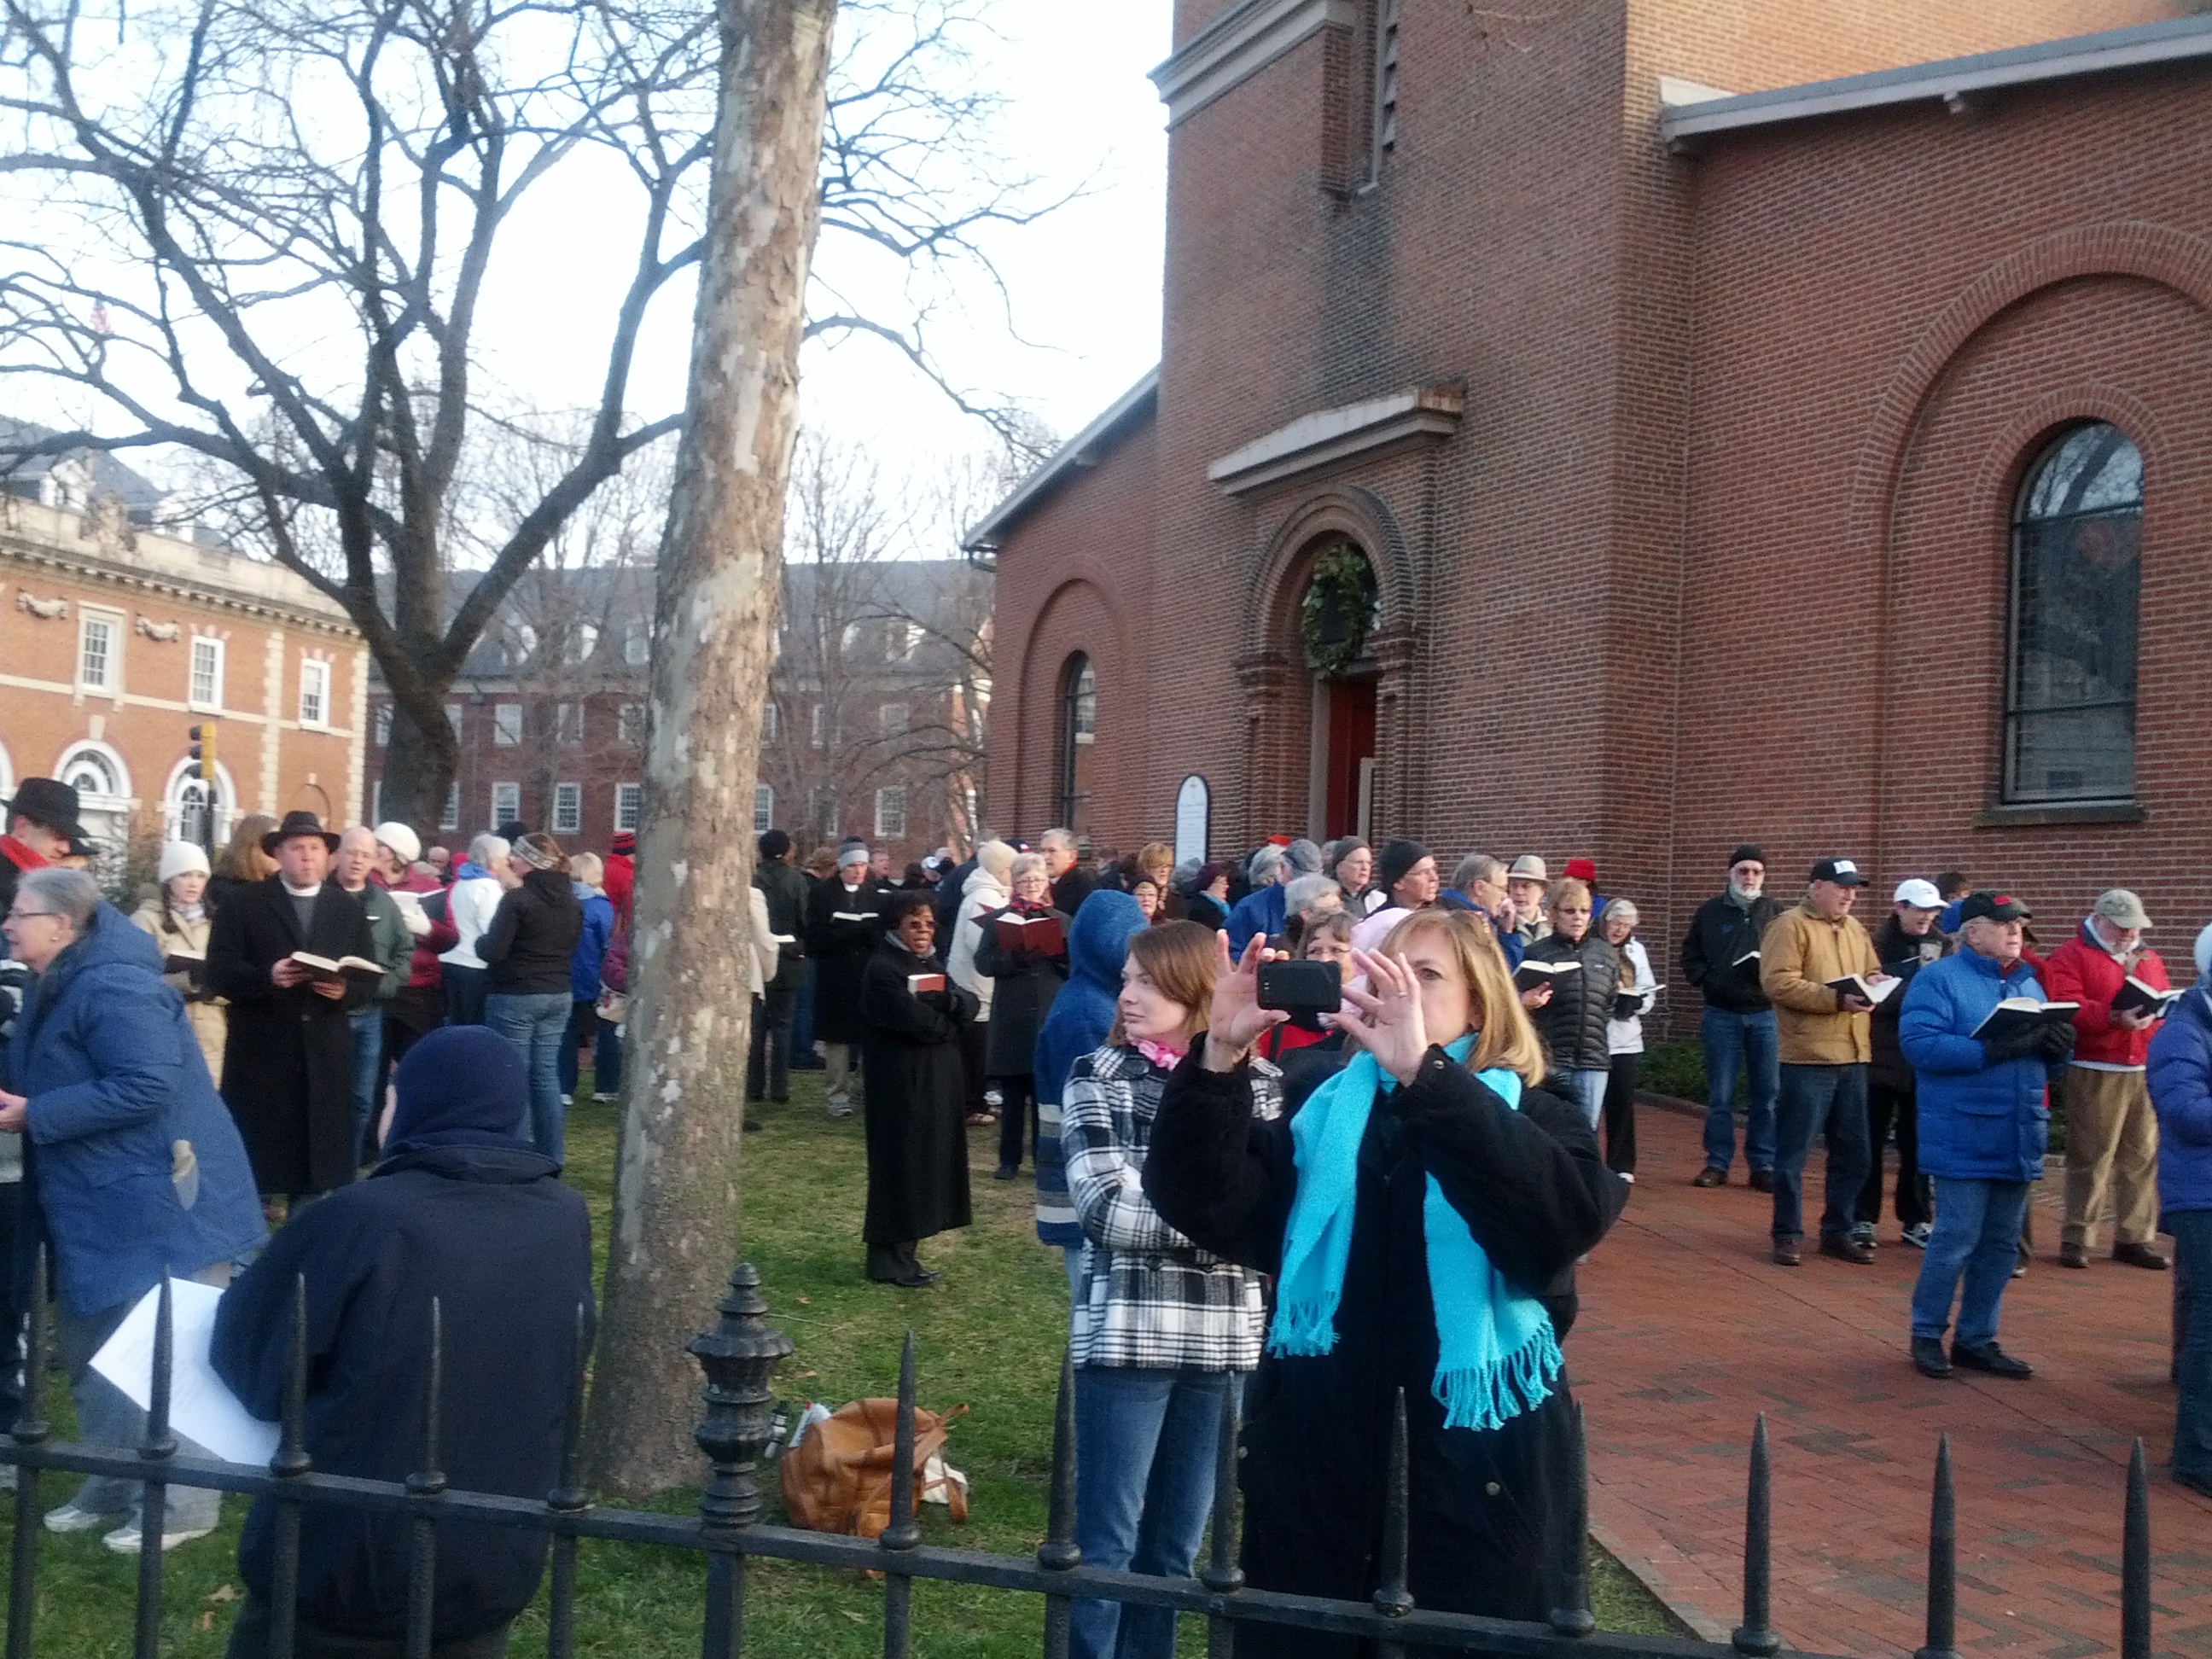 People gathered outside St. Anne's Parish in Annapolis. St. Anne's set up an amplified piano outside its doors, and members of the church & public sang hymns as part of the counter protest.